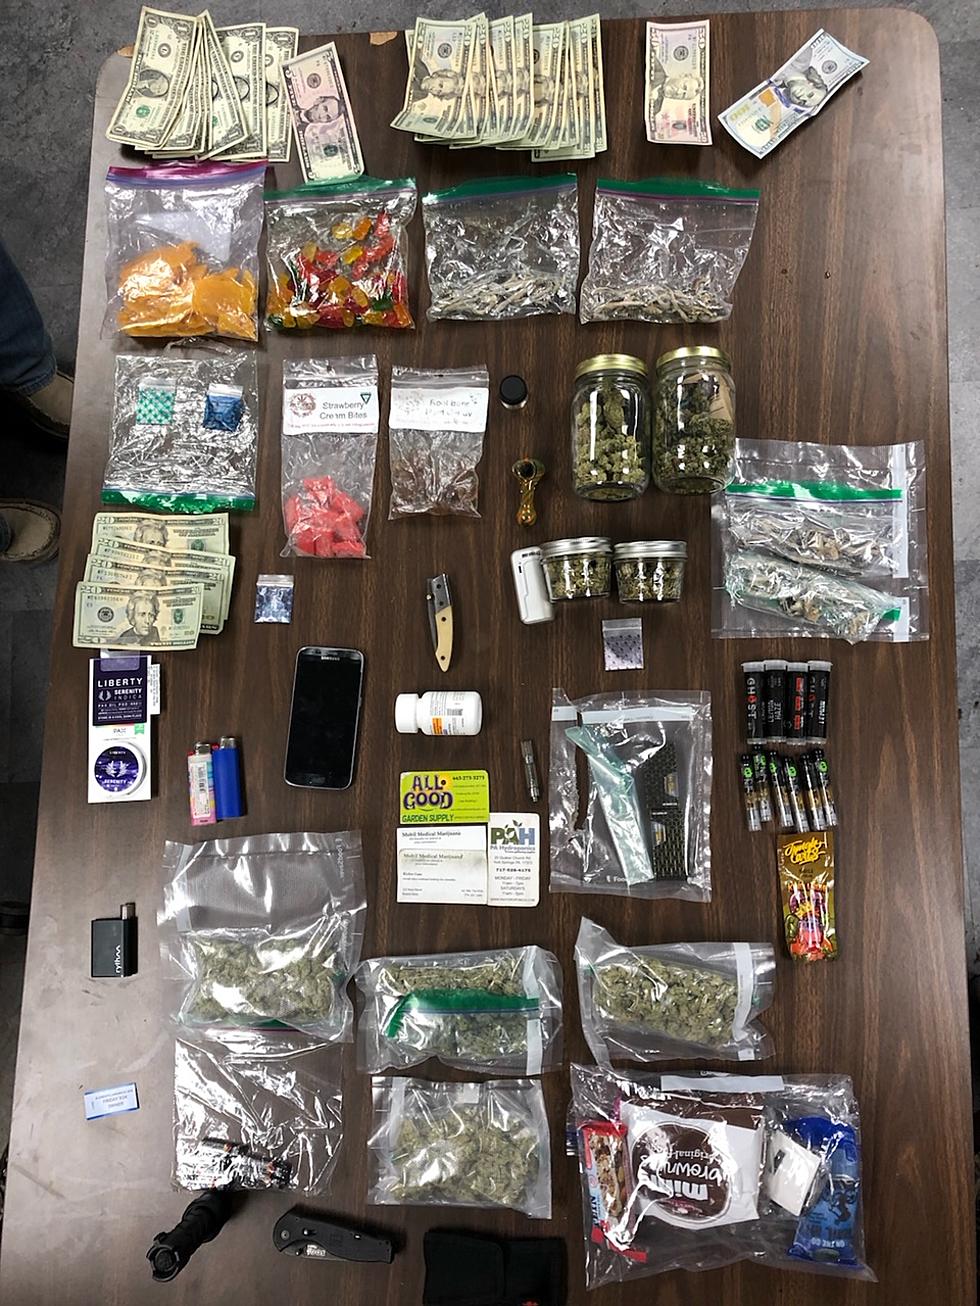 Undercover Pa. Troopers Score Drugs at Lakewood Festival